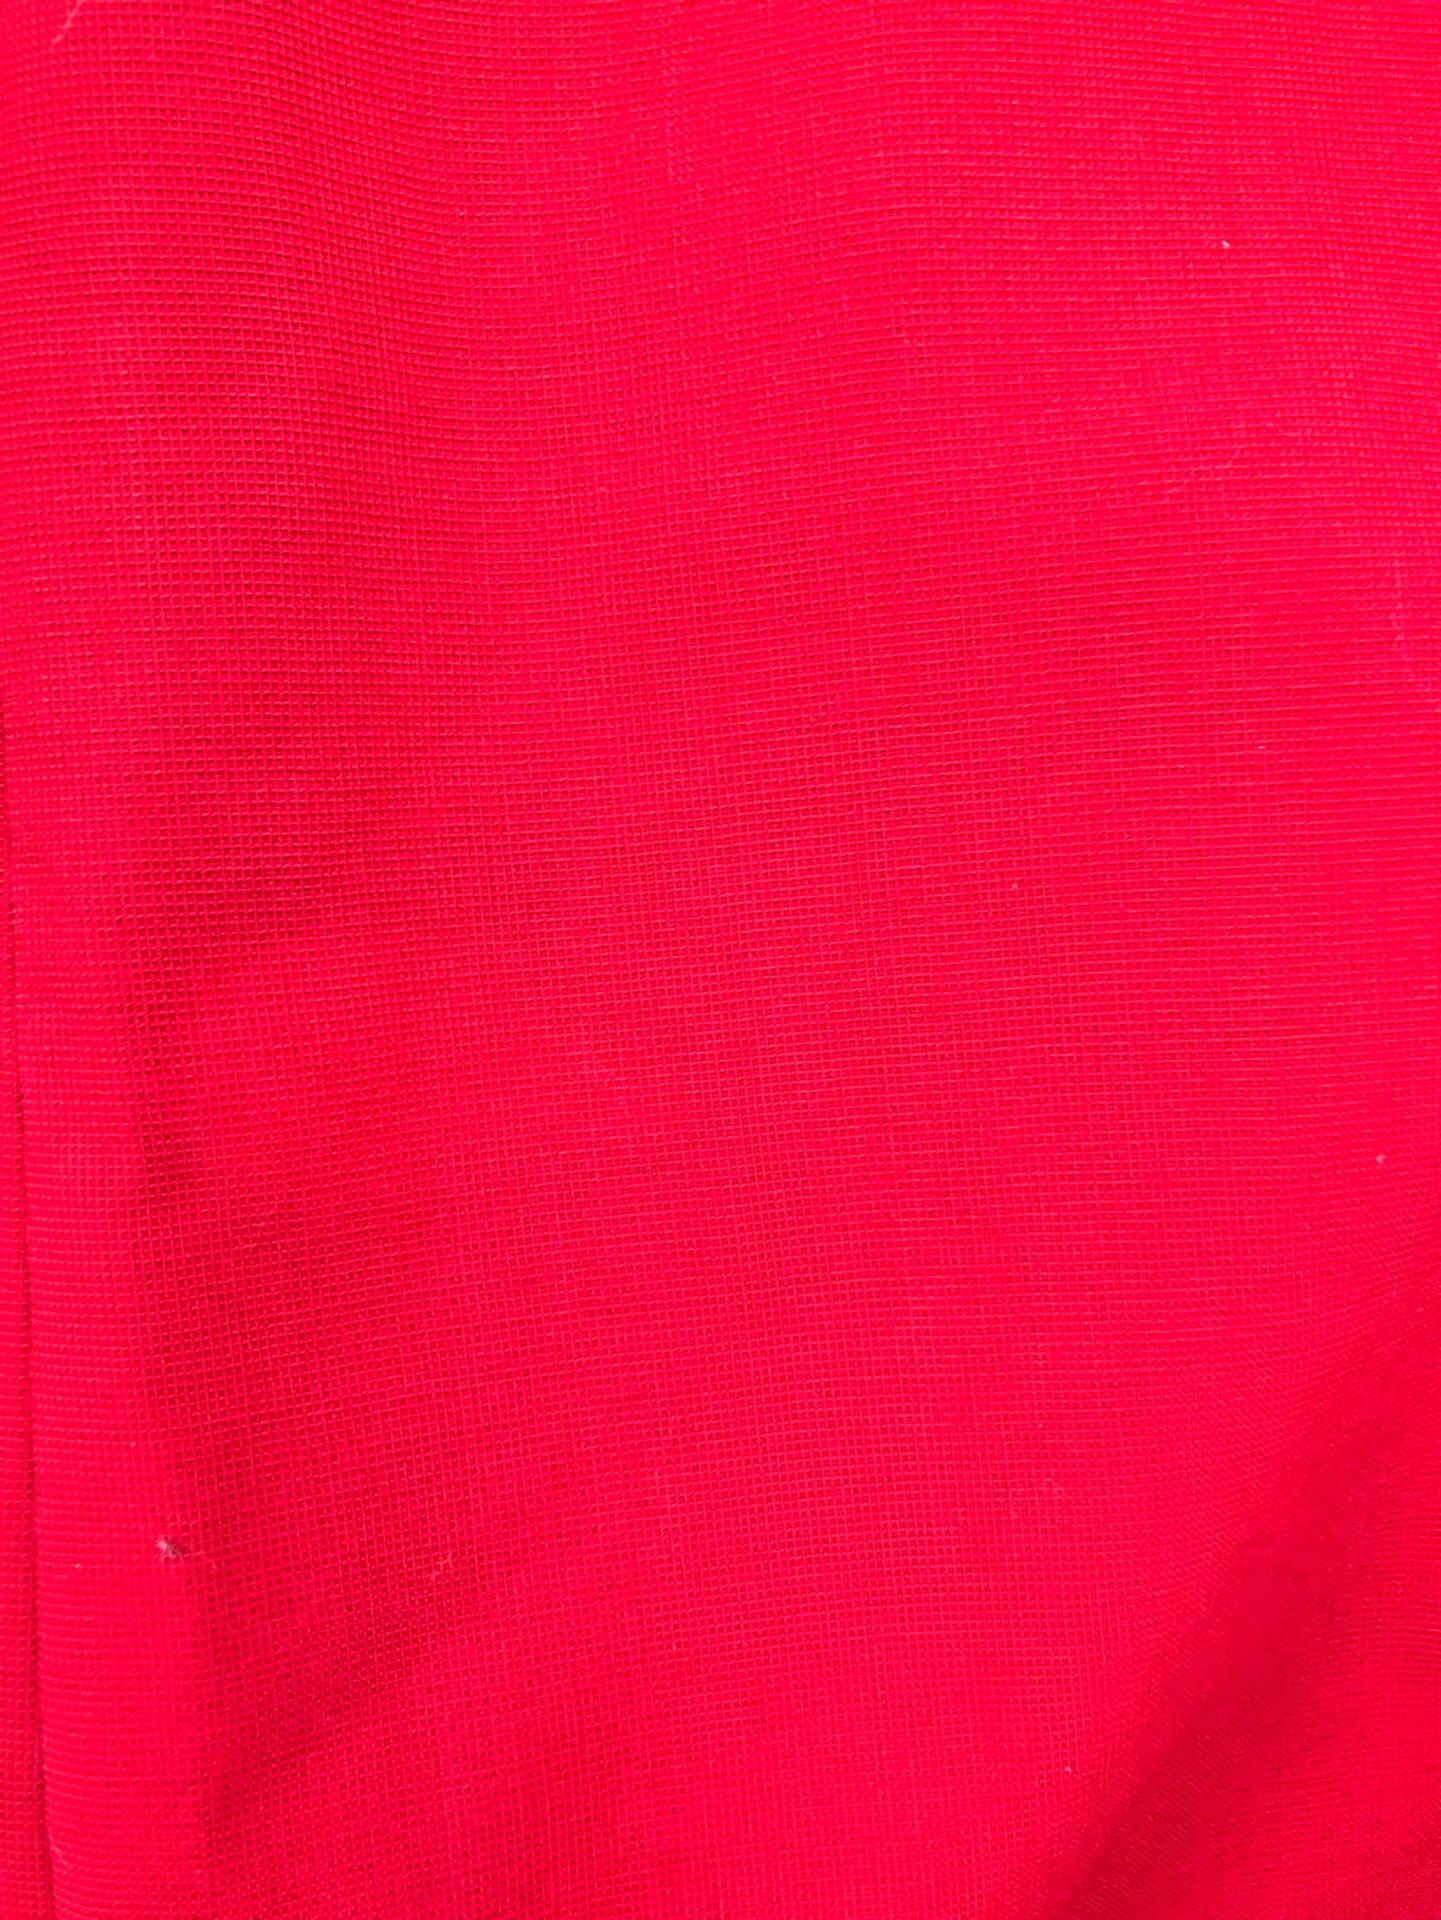 DRESS. YVES SAINT LAURENT CLASSIC RED SLIP DRESS. FRENCH SIZE 40, USA SIZE 8. LENGTH 102cm, PIT TO - Image 4 of 8